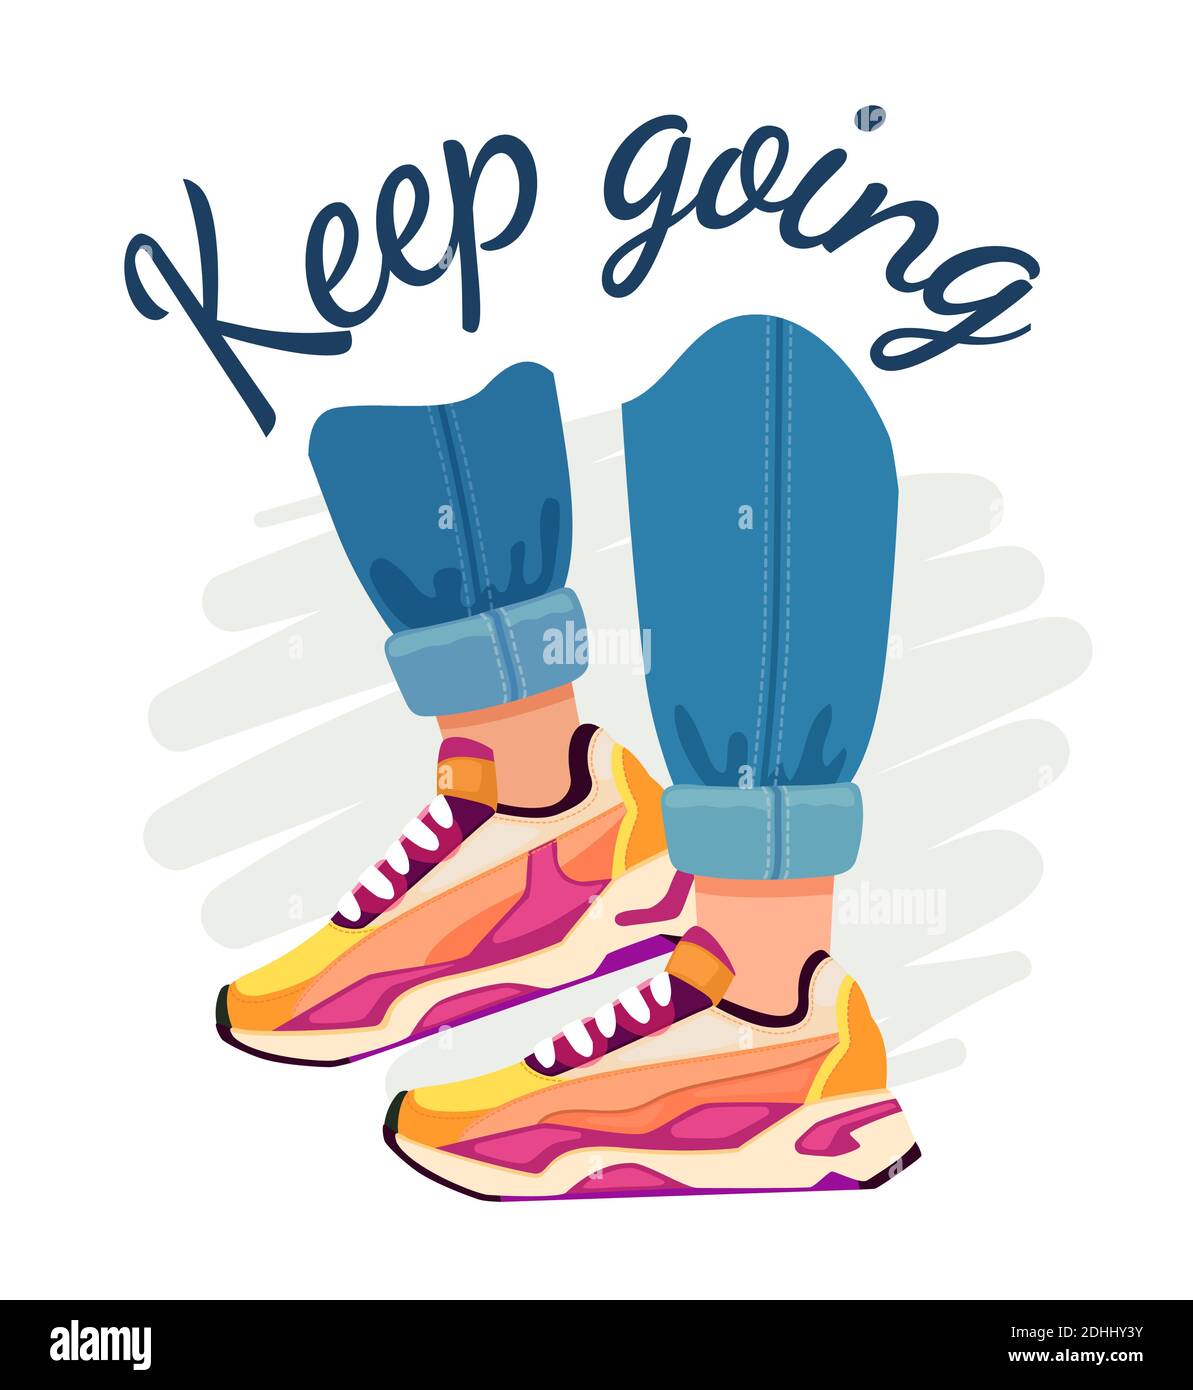 752+ Catchy Running Shoe Slogans and Taglines (Generator + Guide) - BrandBoy